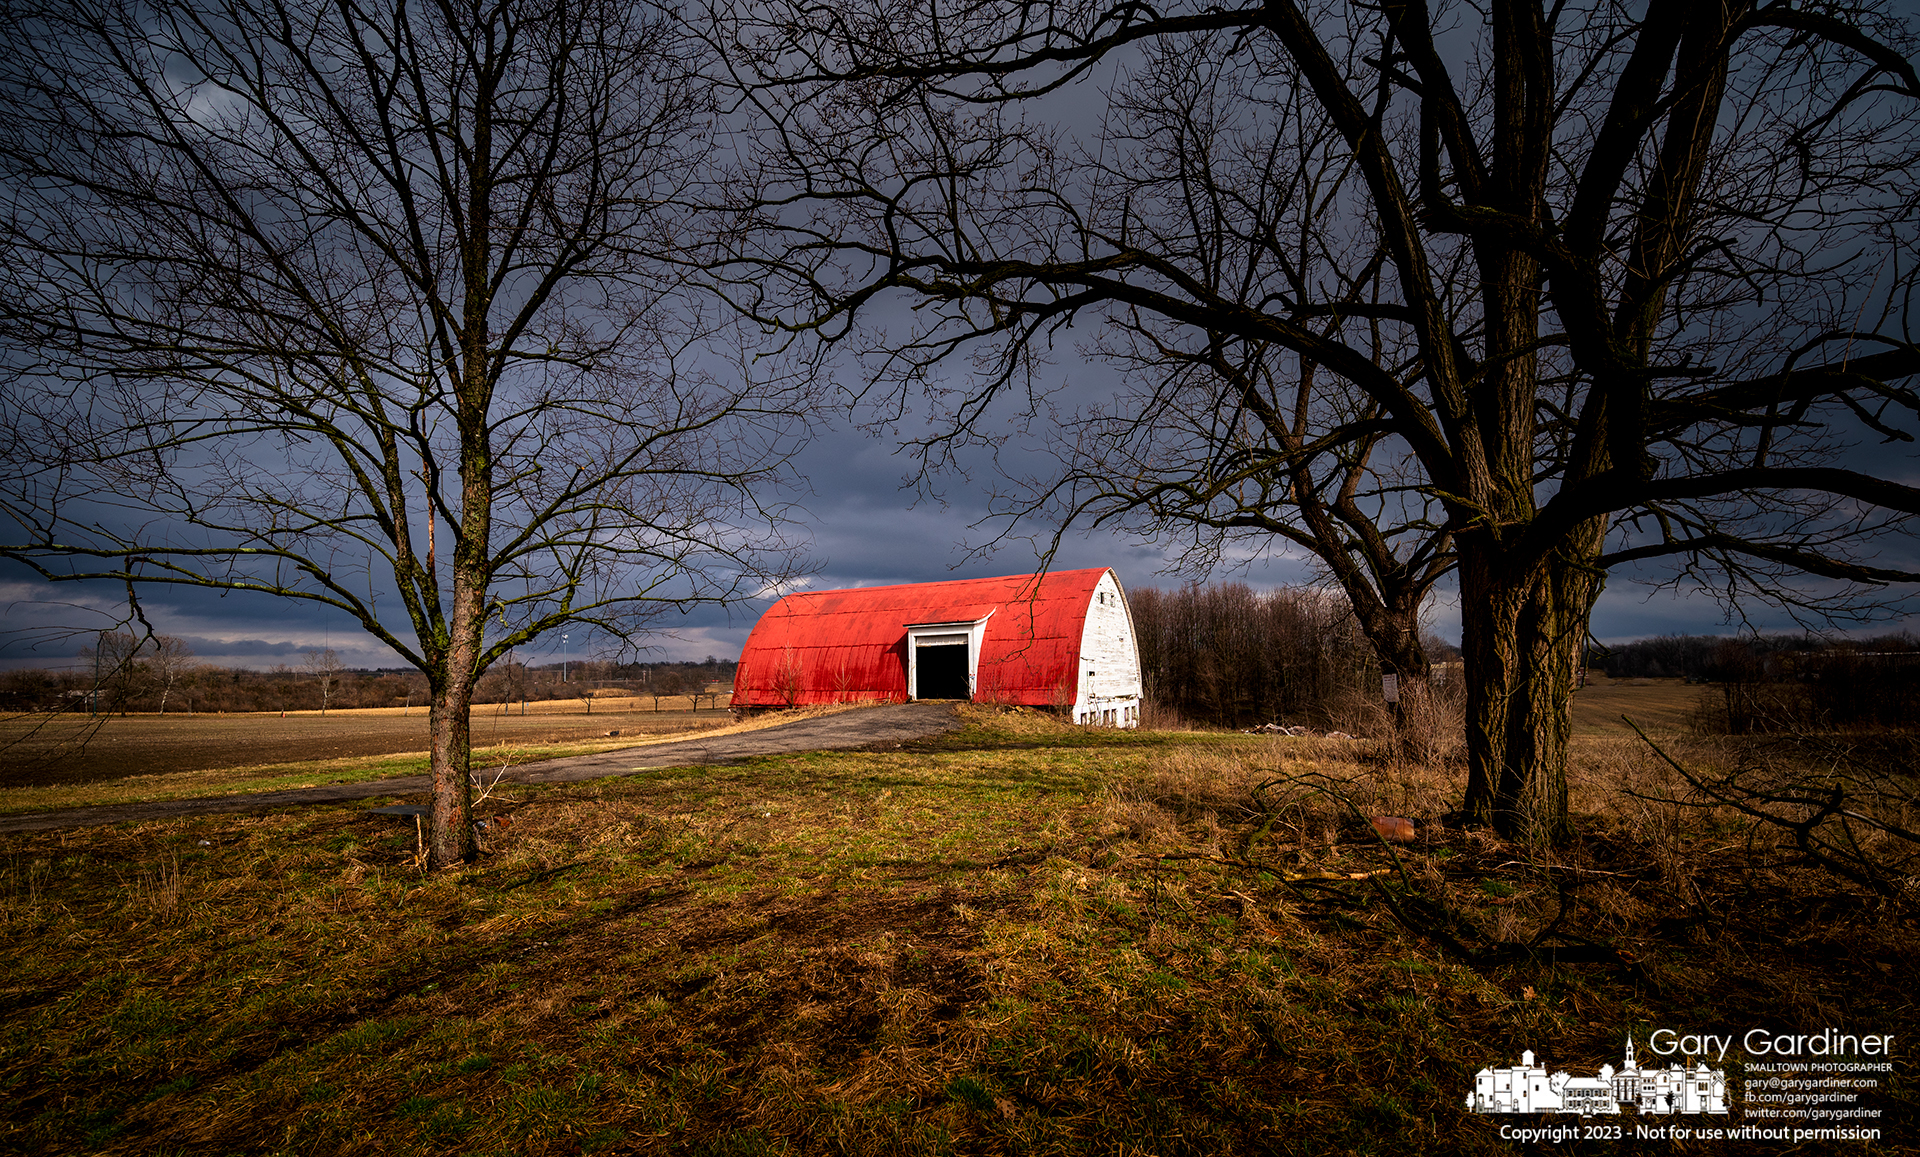 The afternoon sun breaks through thick storm clouds illuminating the old barn on the Braun Farm. My Final Photo for February 27, 2023.